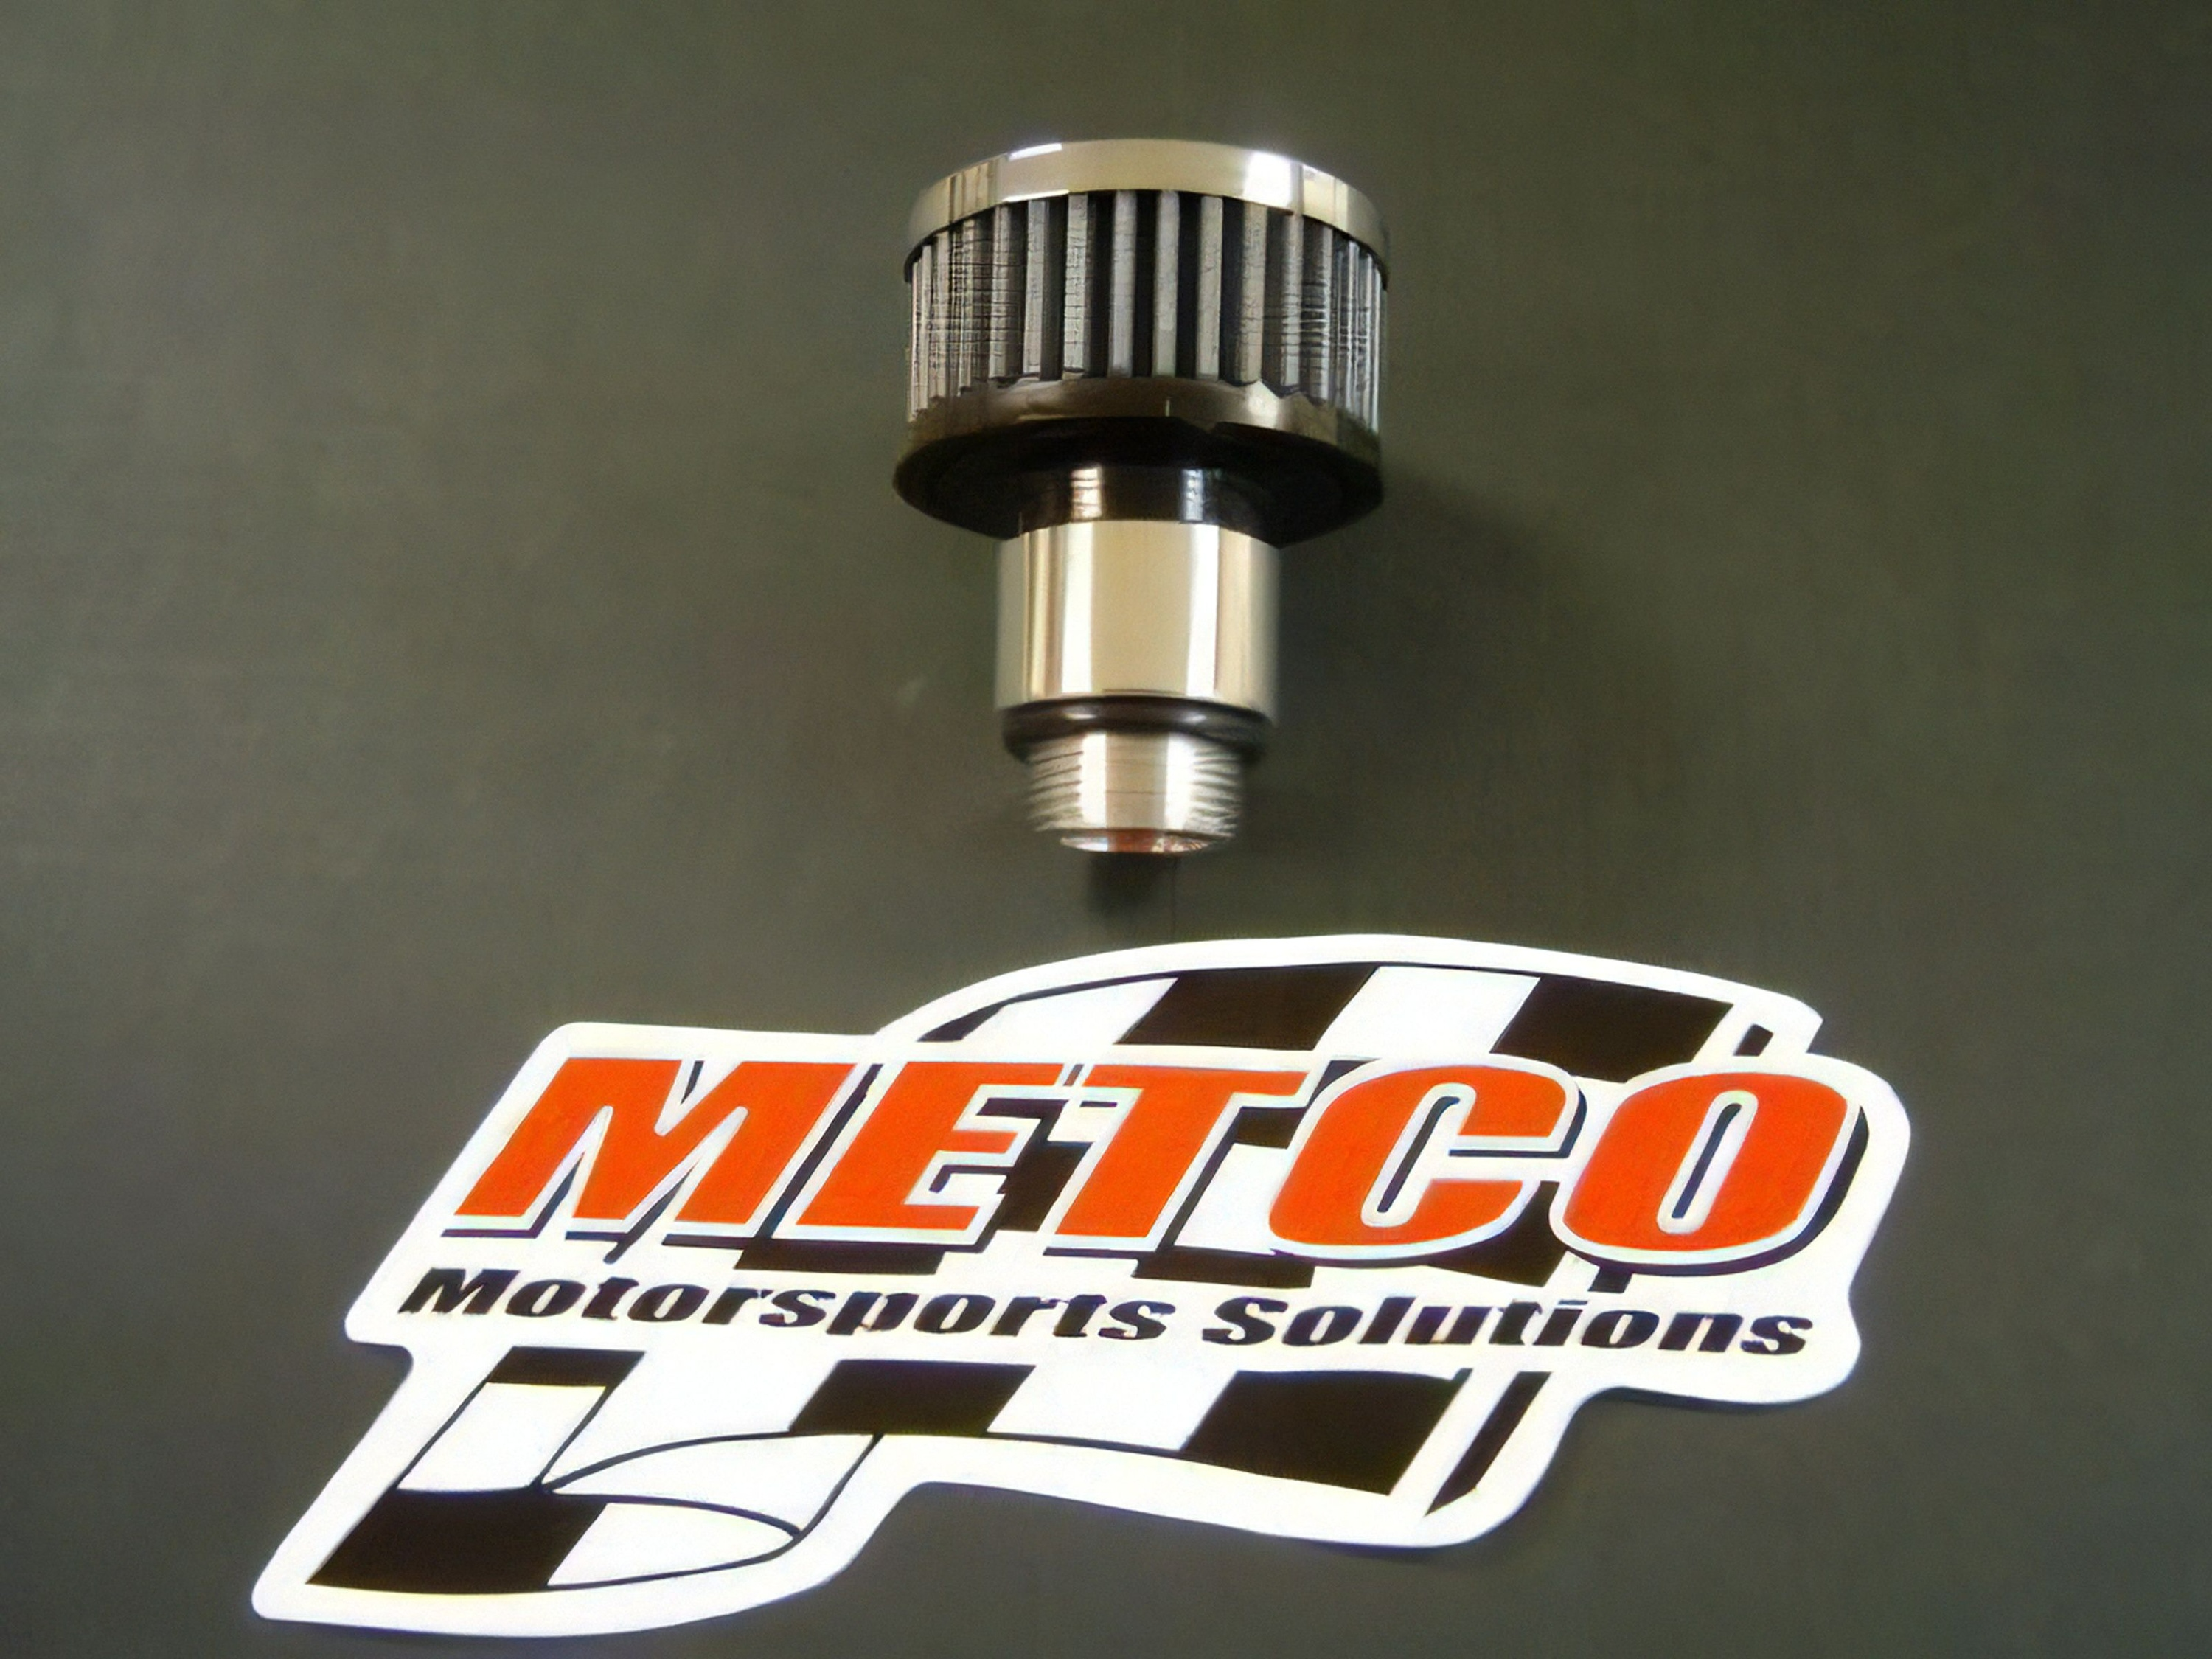 METCO VALVE COVER BREATHER W/CHECK VALVE FOR SCREW IN VALVE COVER 1 5/16"-12 THREAD. INCLUDES HOLLEY COVERS